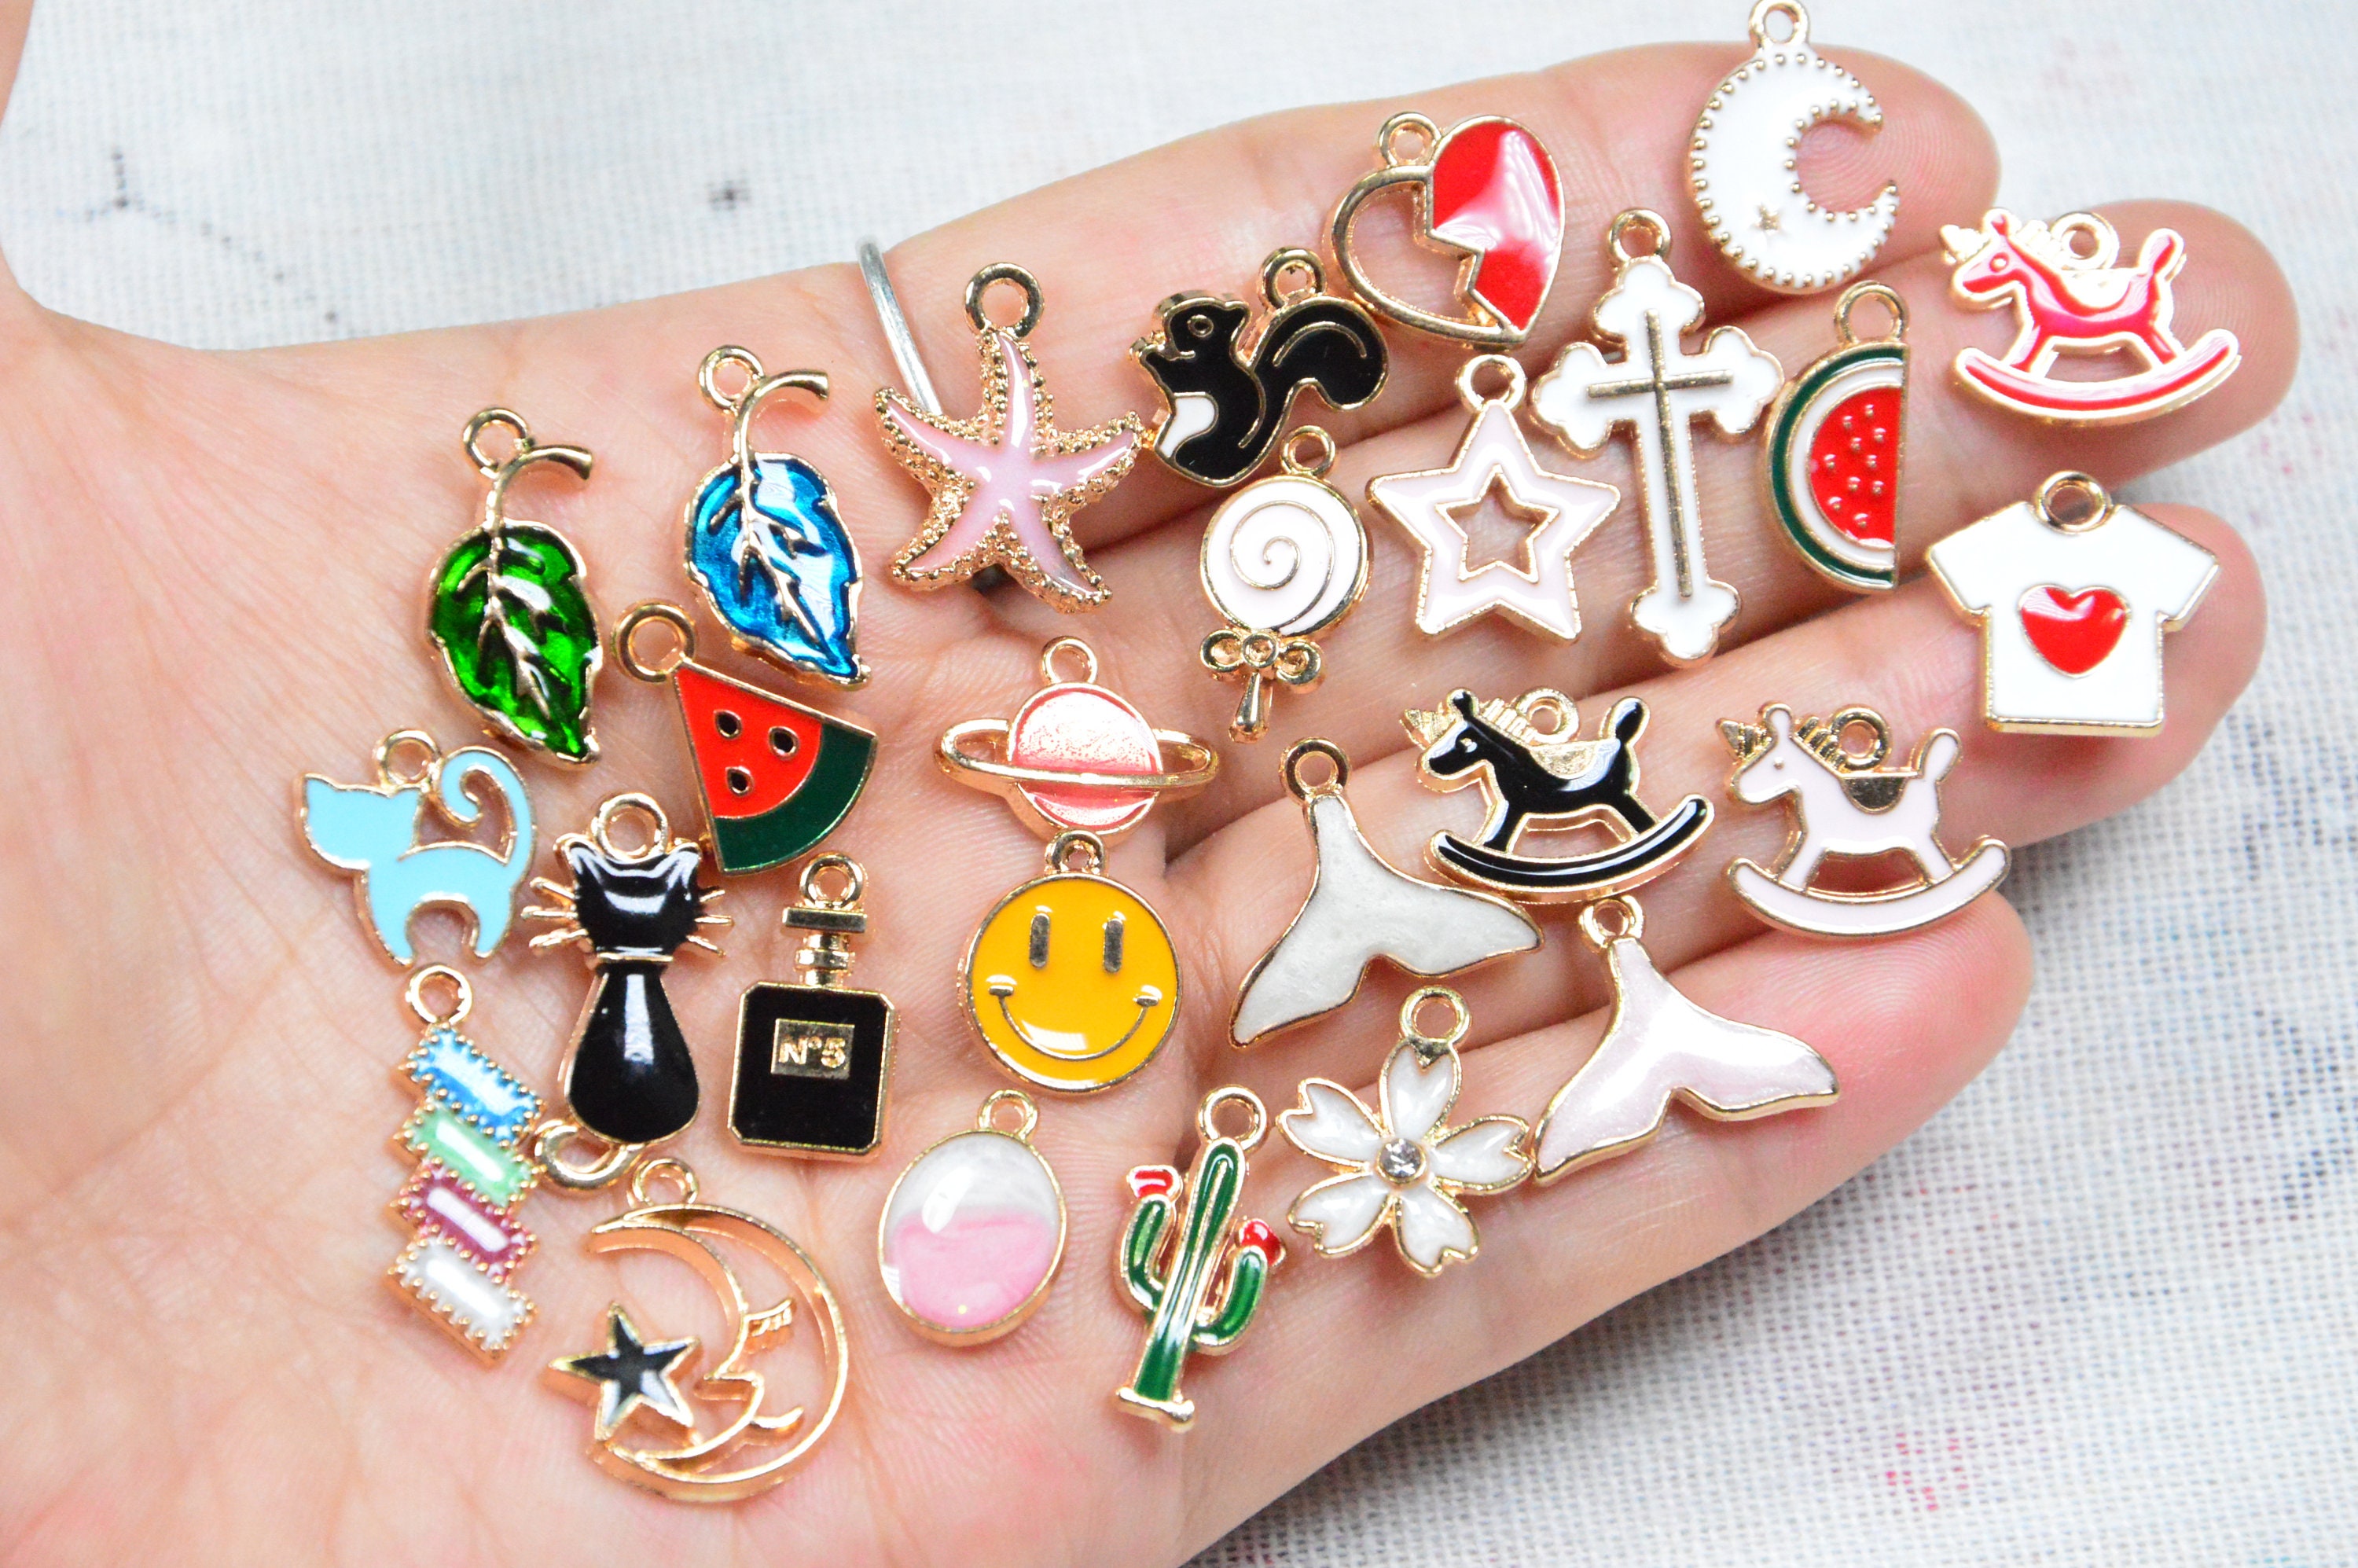 70pcs Enameled Colorful Assorted Charms, Cubic Charms, Bulk Charms,pendants,  Gold Tone Charms, DIY Charms, Cute Charms for Jewelry Making 